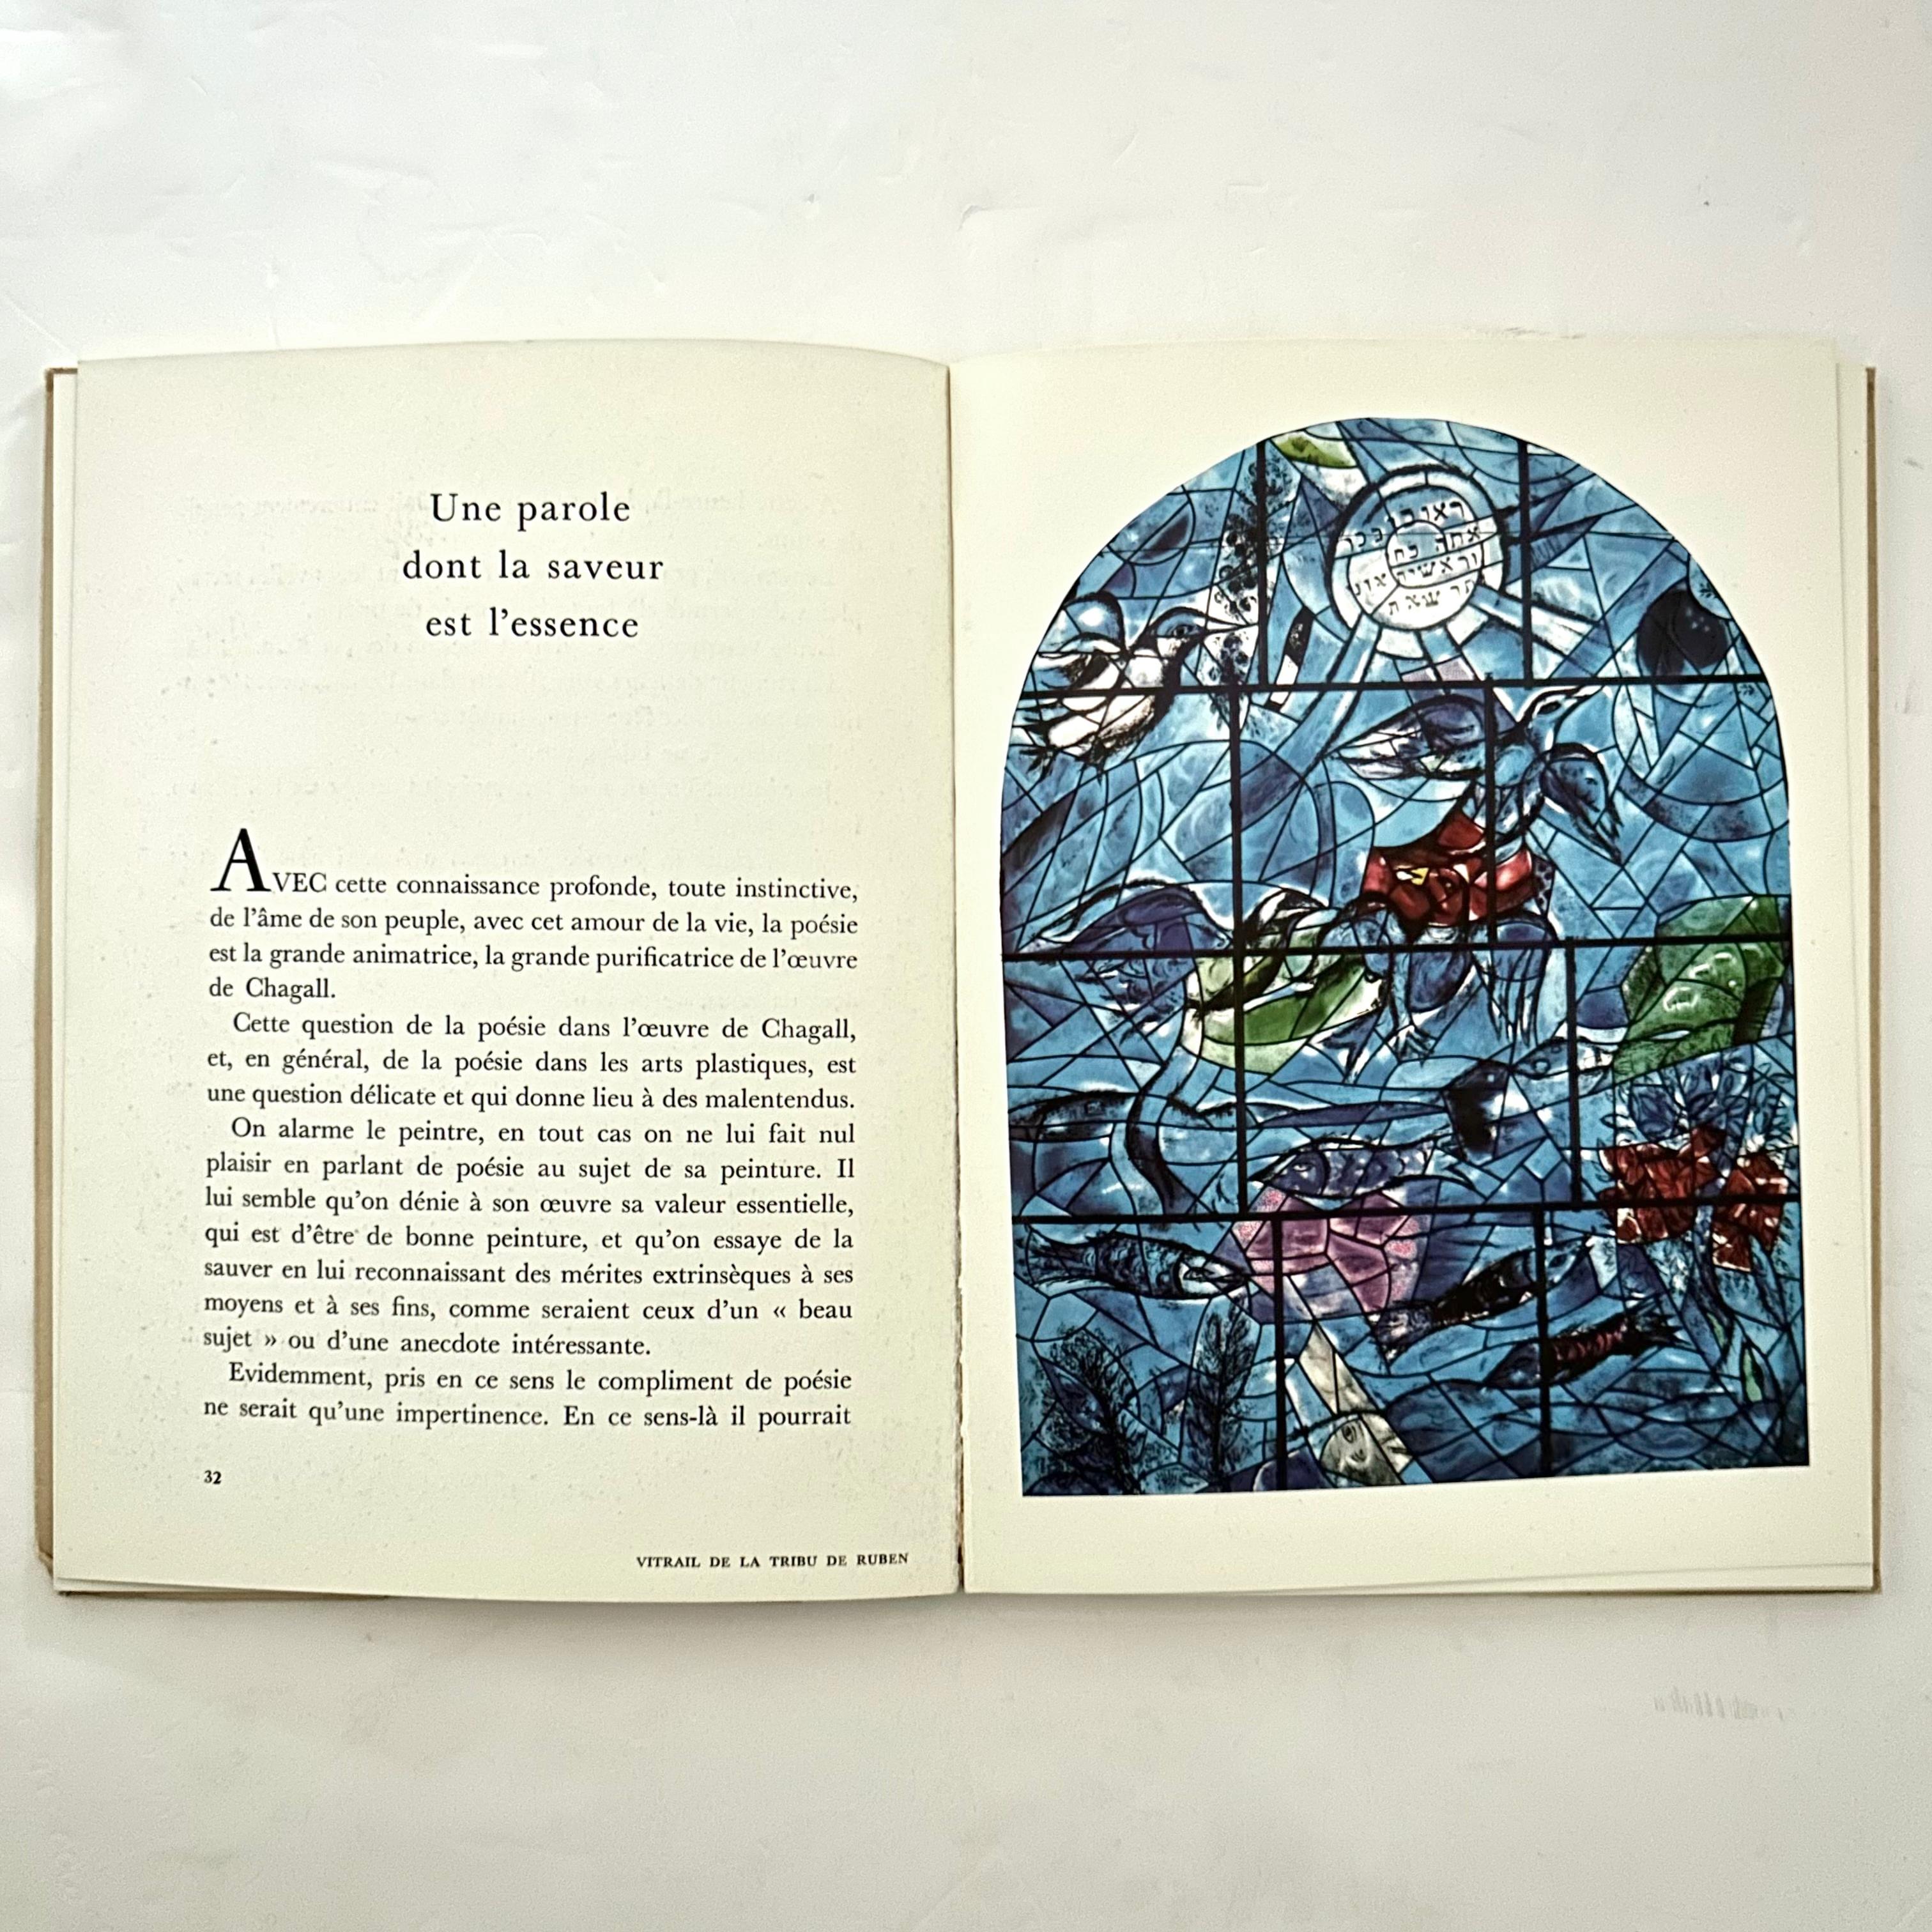 Published by Musées des Arts Décoratifs, Paris, 1st edition, 1961. Softcover with French text.

A scarce catalogue published for the 1961 exhibition at the Musées des Arts Décoratifs. 

This volume documents Chagall’s stained glass work, most